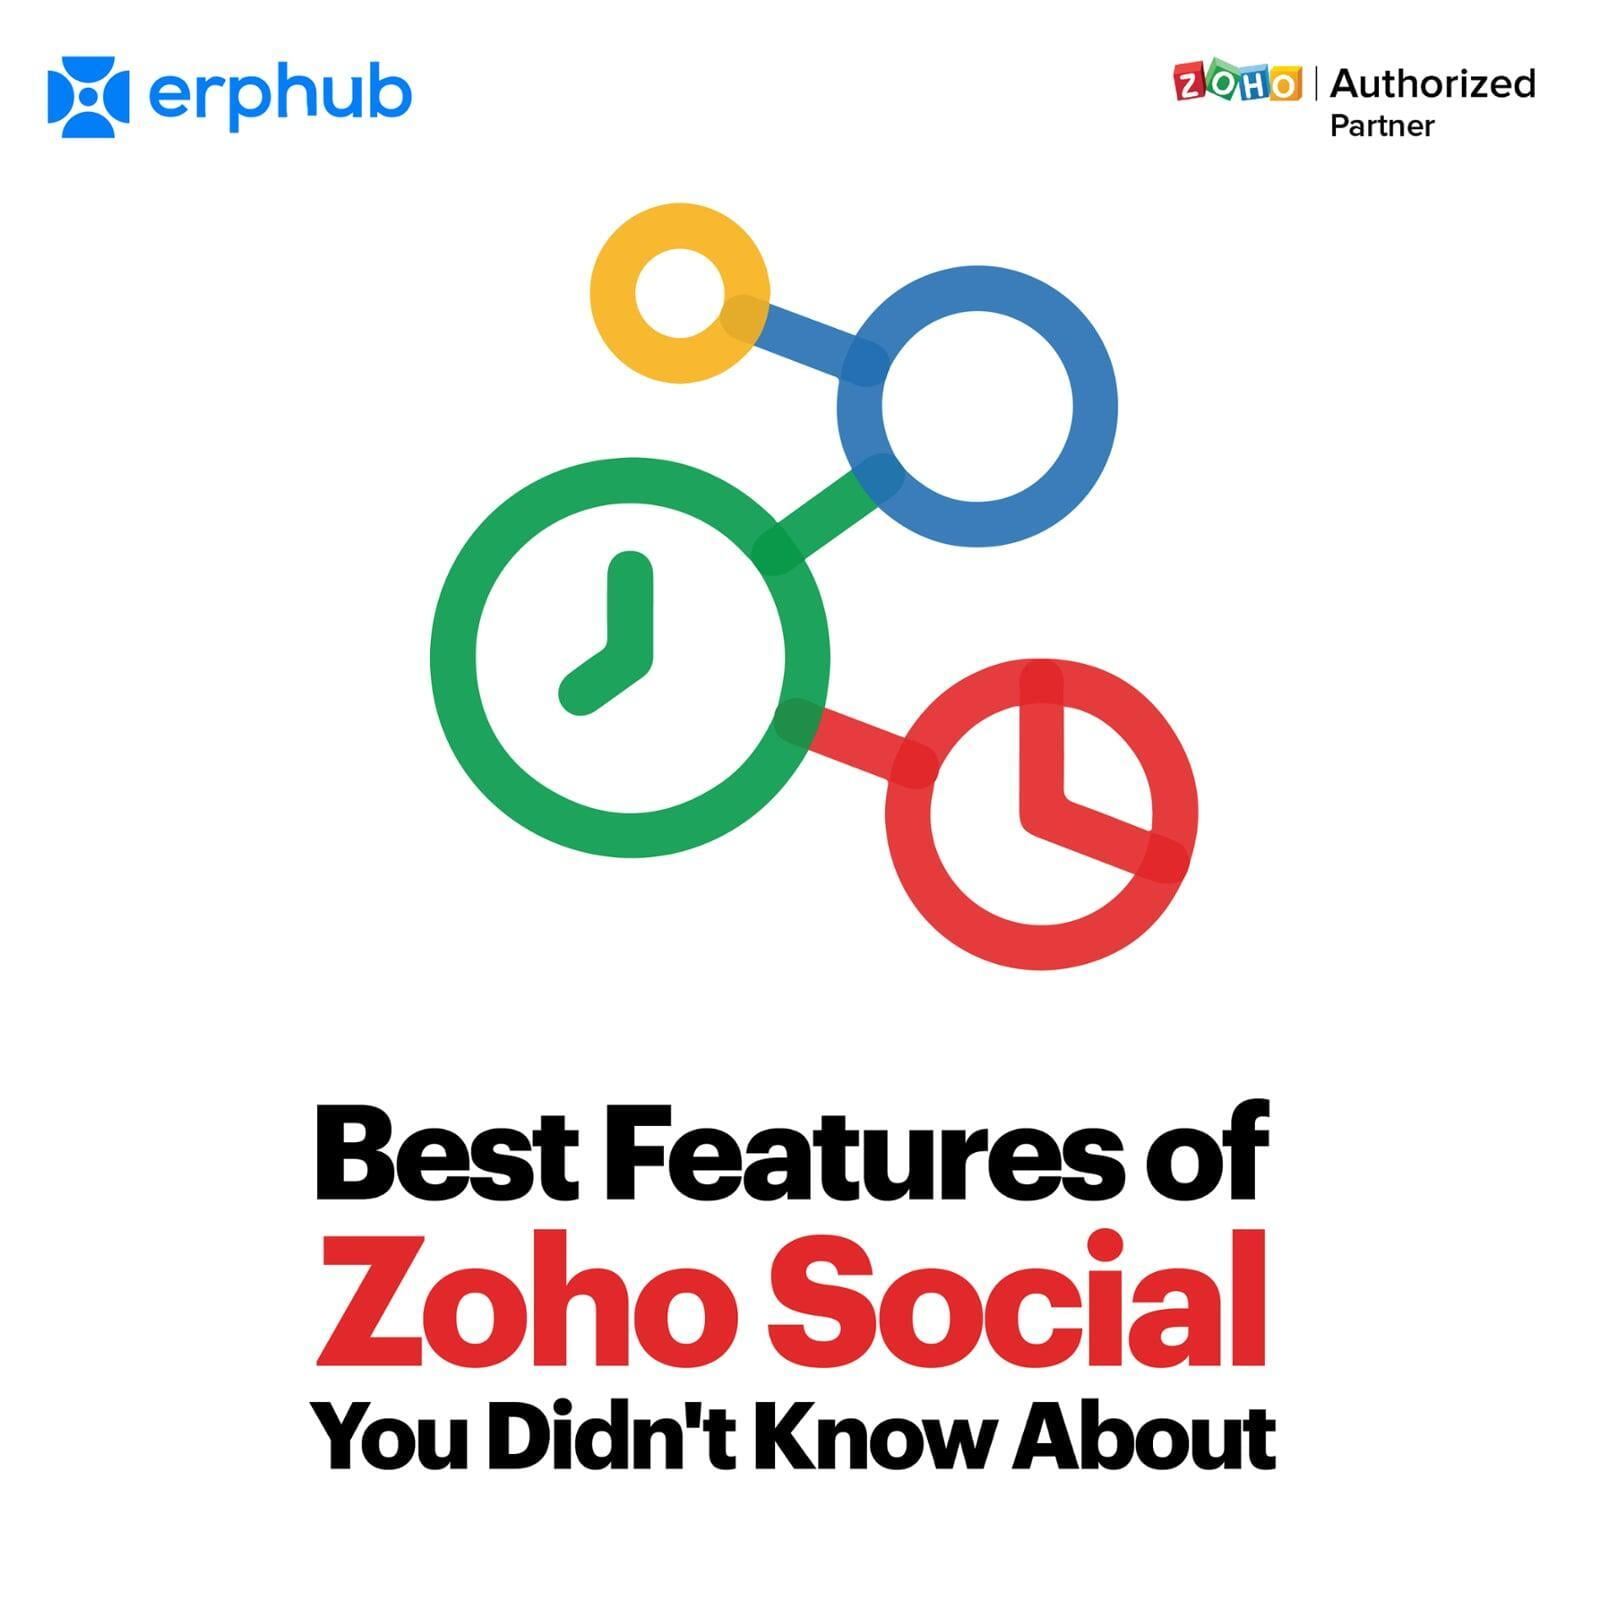 Top Features Of Zoho Social That You Didn't Know About   